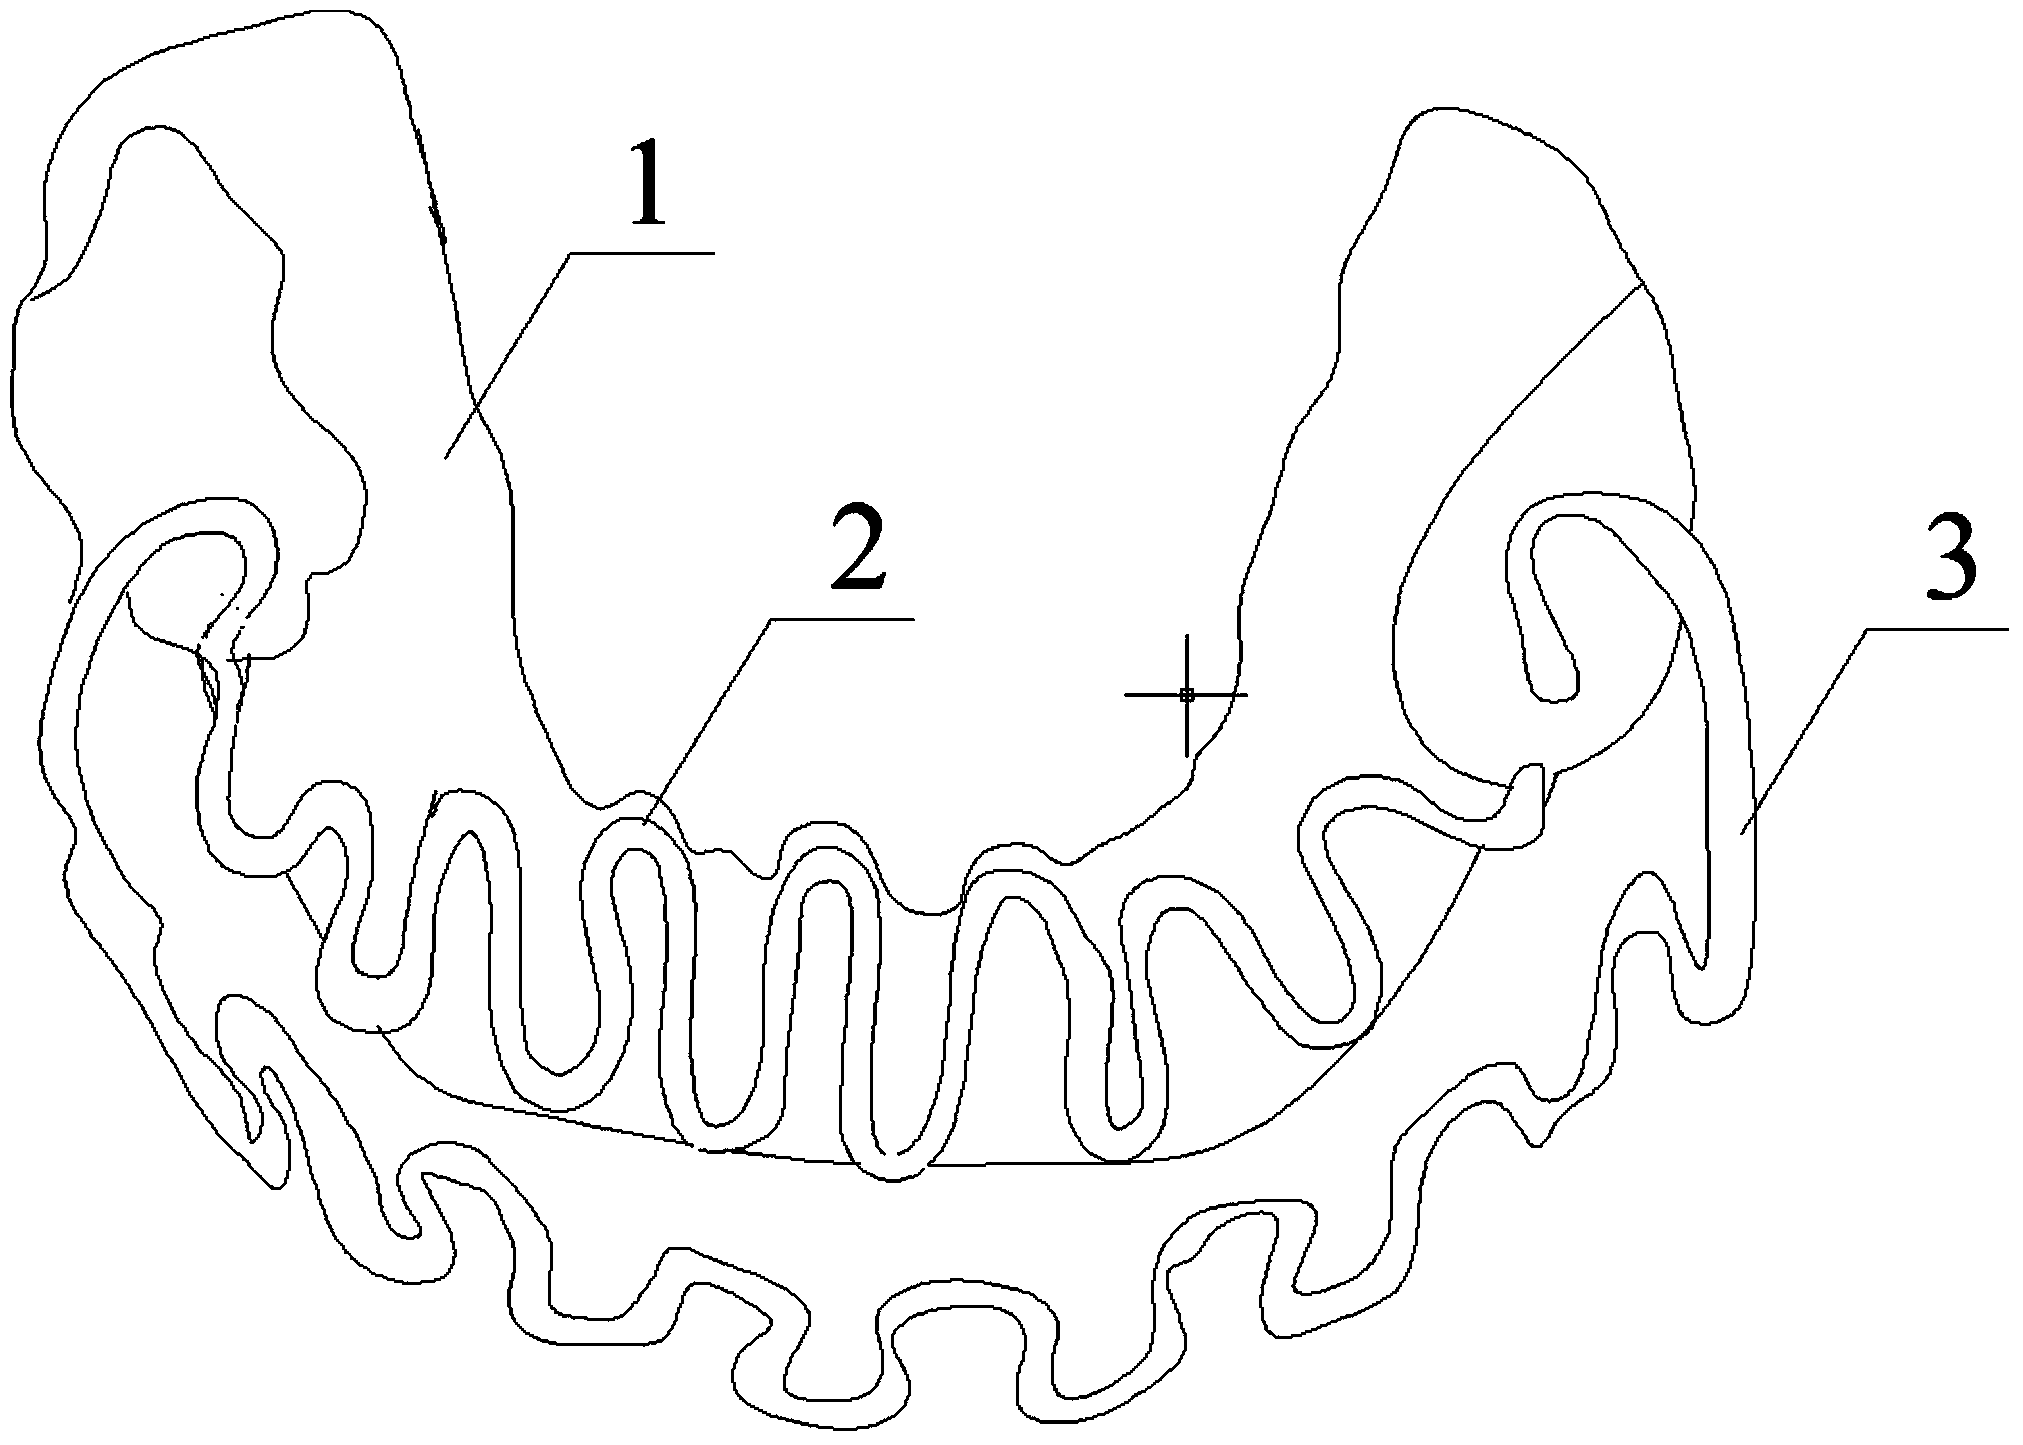 Interactive appliance of upper and lower jaws